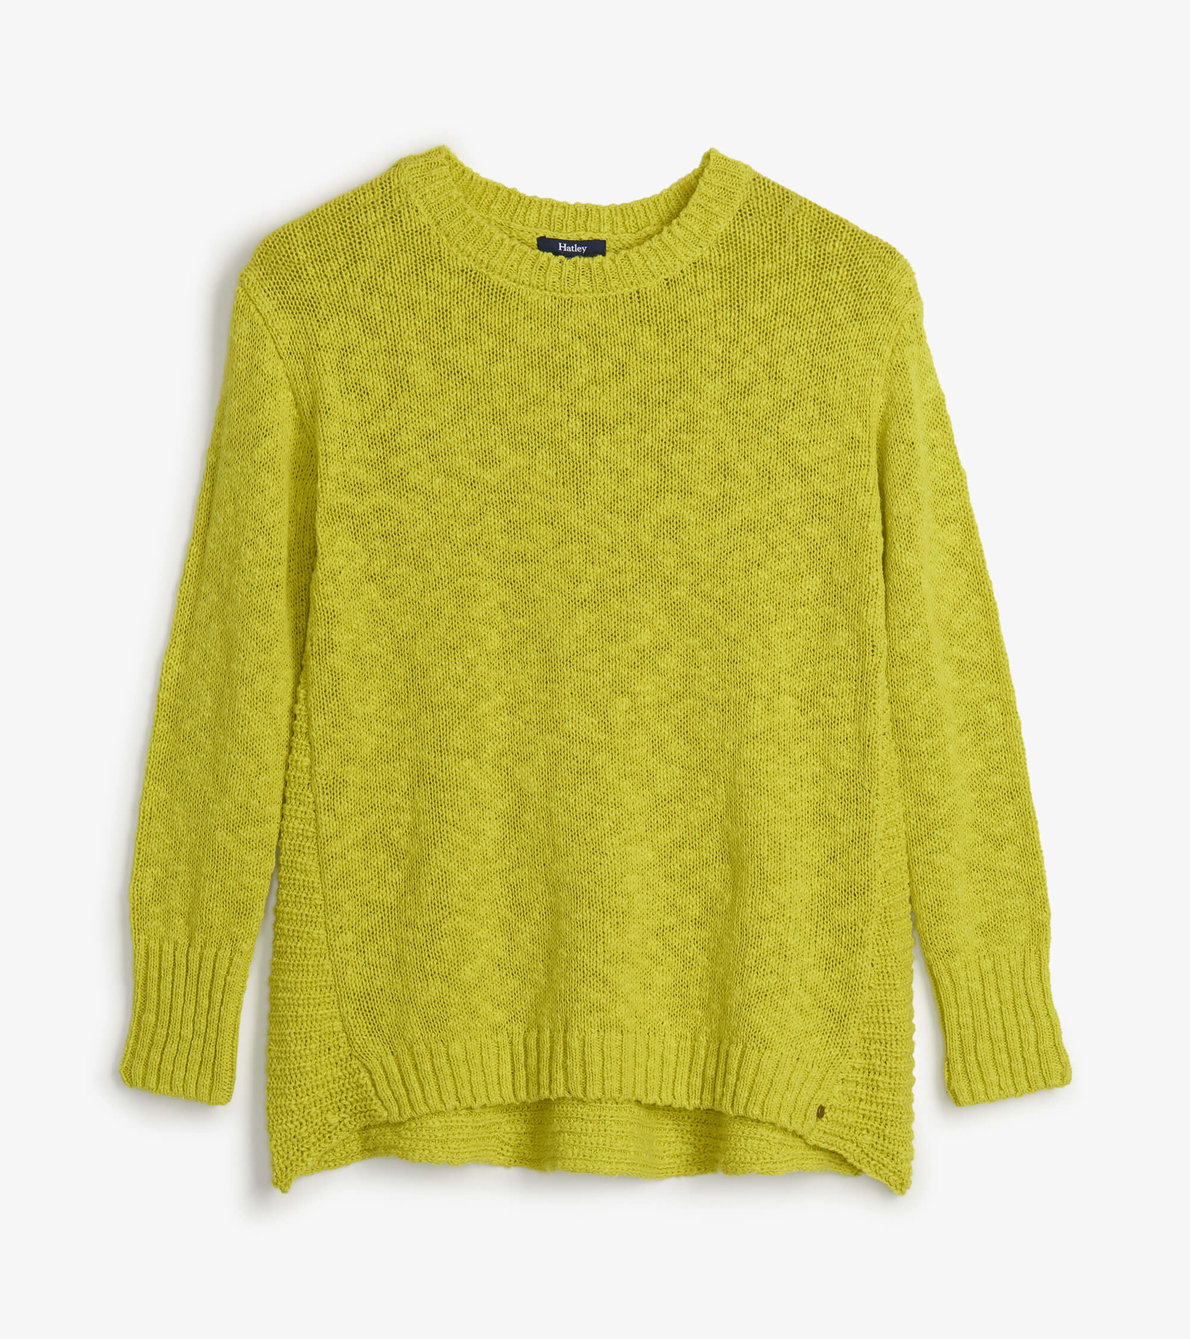 View larger image of Tenley Sweater - Sunny Lime